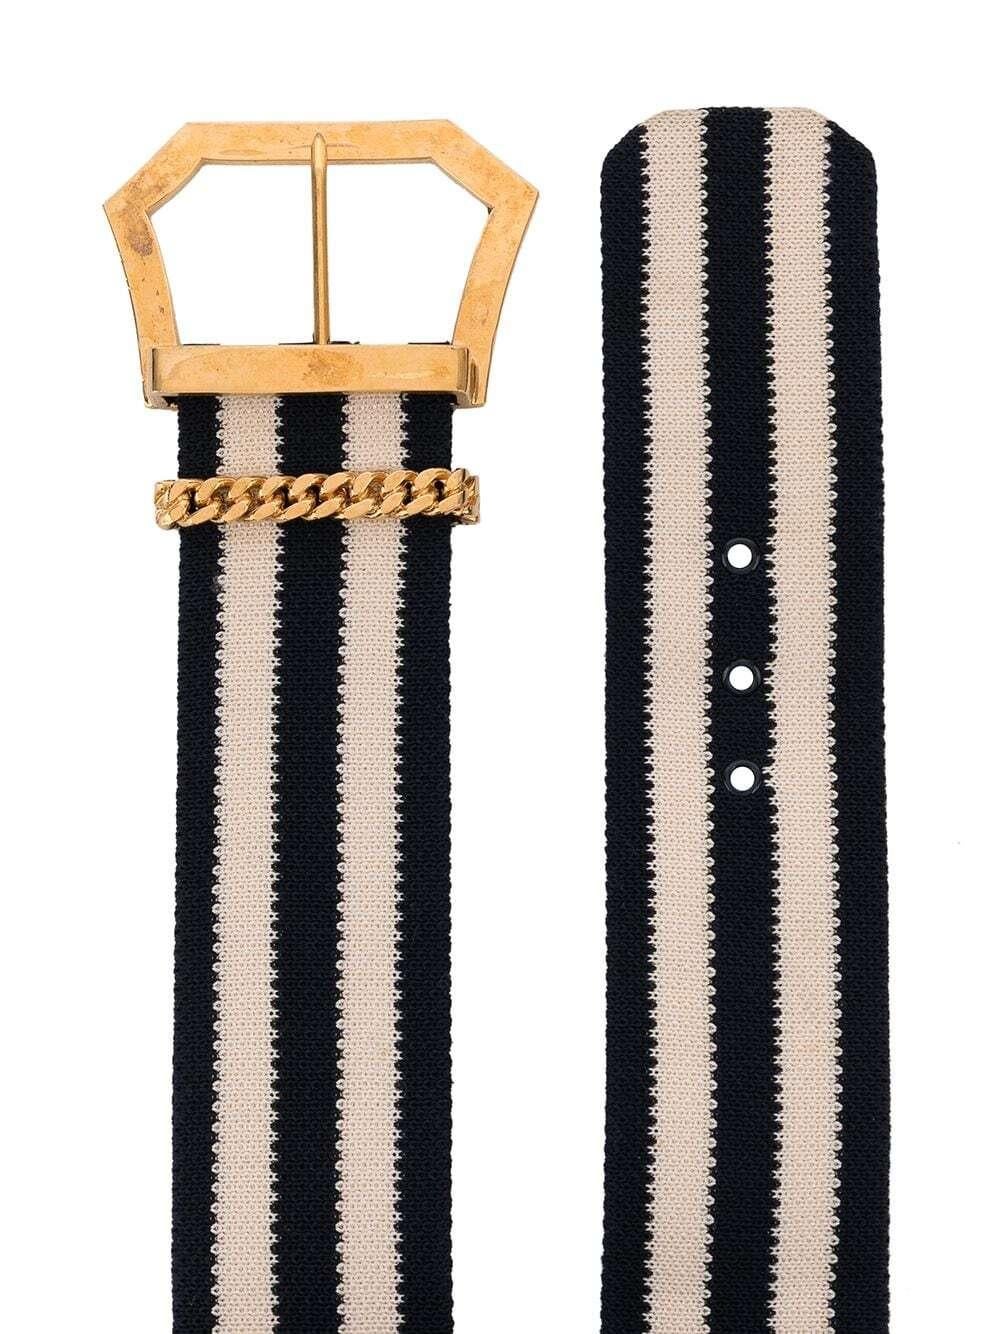 Take your accessories repertoire to whimsical heights with this vintage Chanel belt. It was designed in 1984, a year after Karl Lagerfeld had been inducted to creative director of the house. Imbued with his playfully feminine aesthetic, the belt